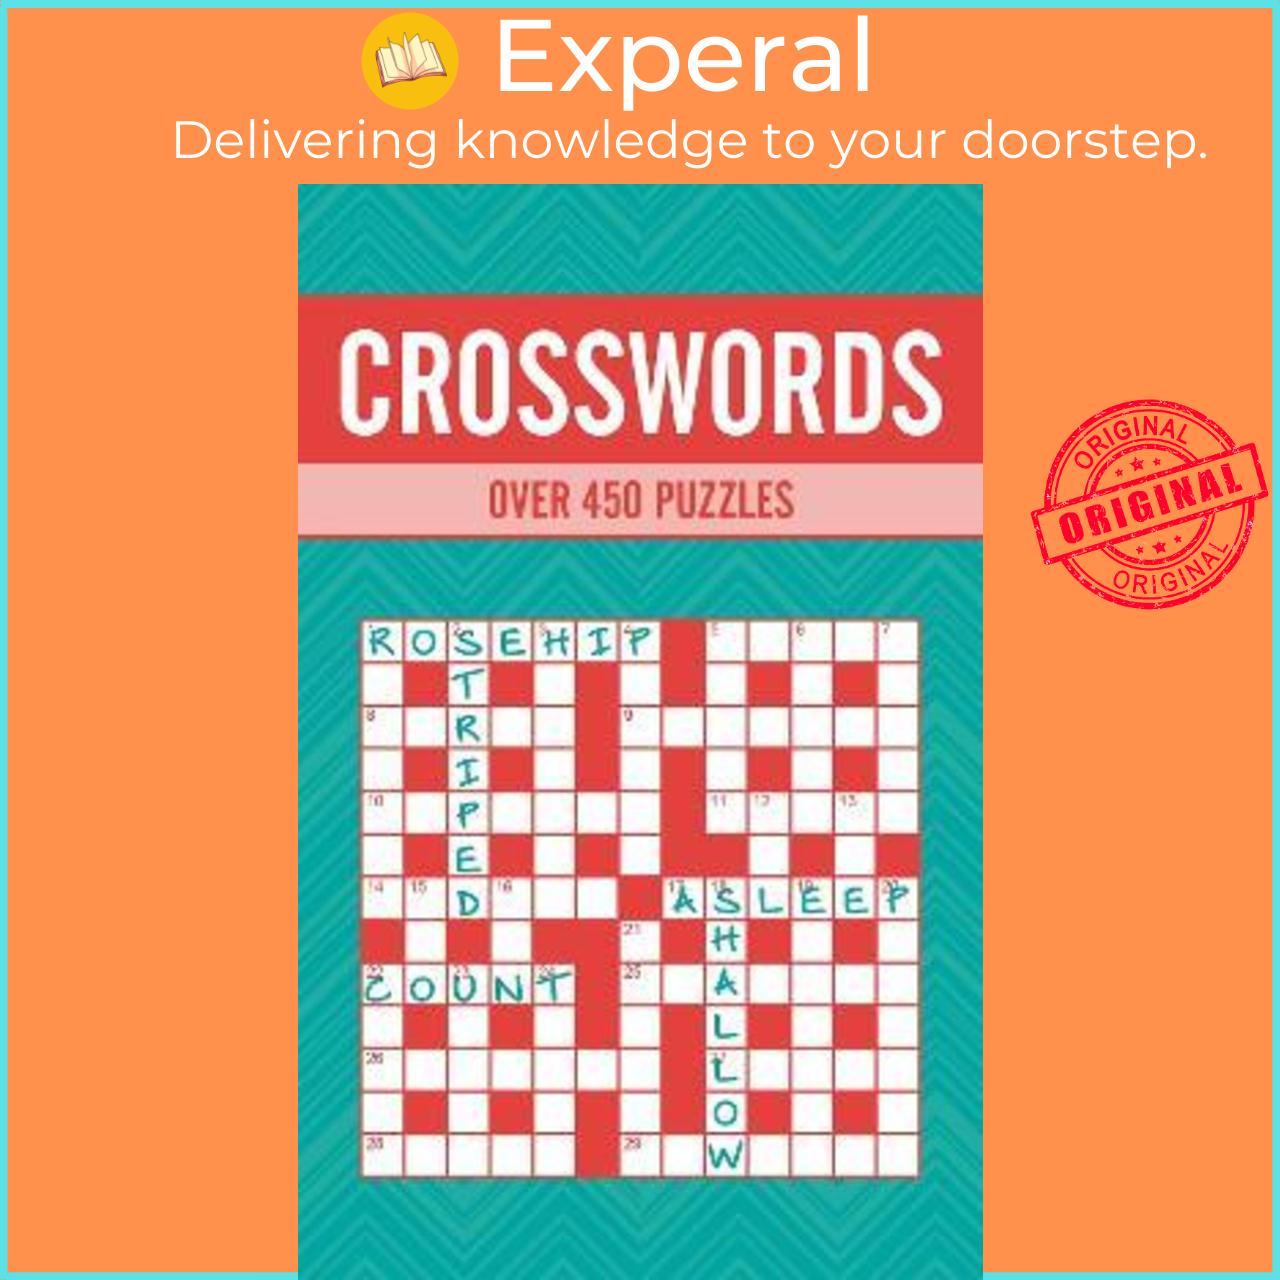 Sách - Crosswords : Over 450 Puzzles by Eric Saunders (UK edition, paperback)